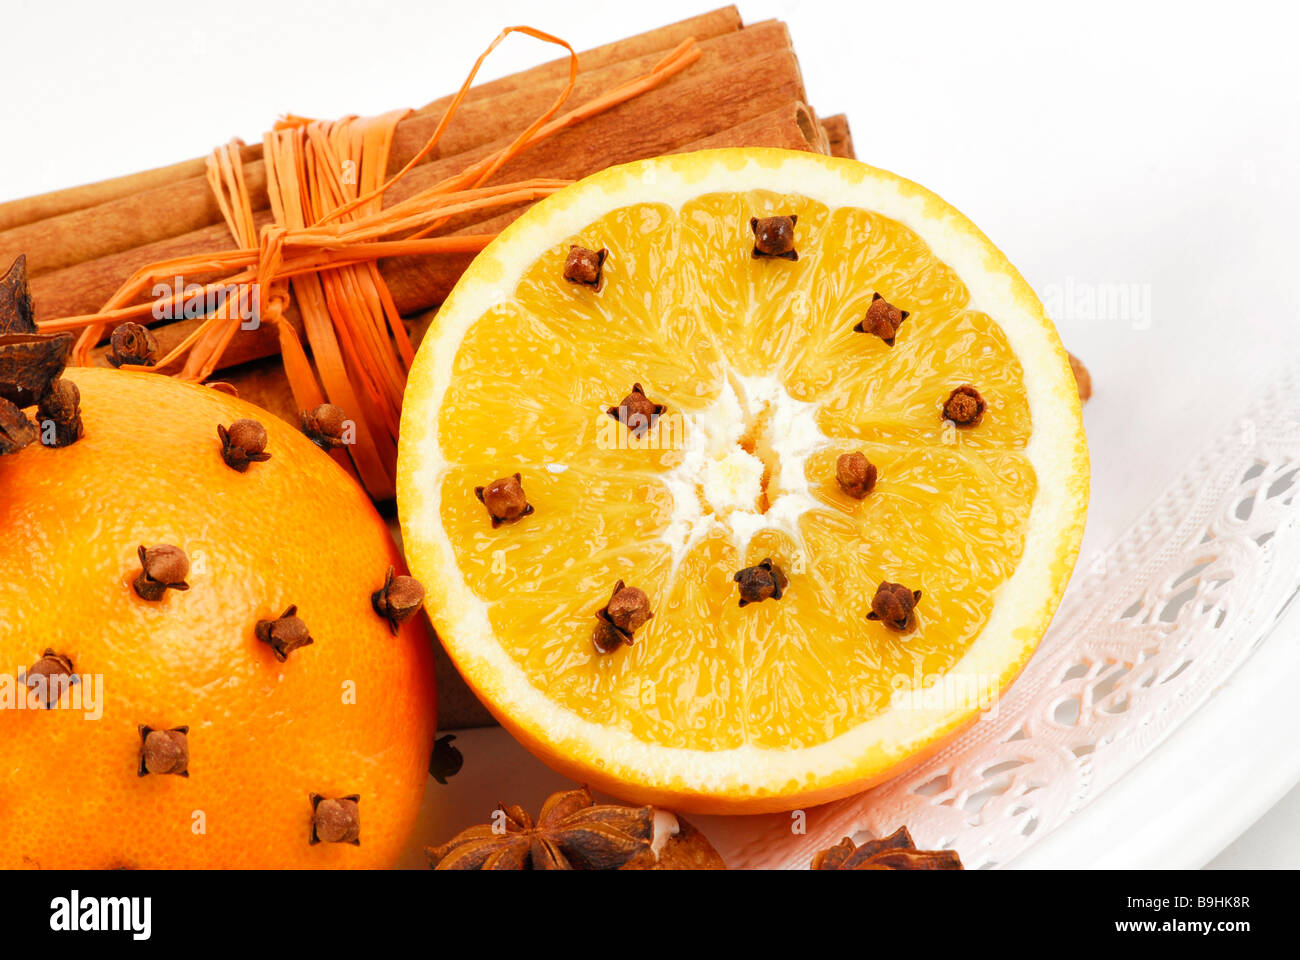 Oranges studded with cloves and cinnamon sticks, aromatic christmas decoration Stock Photo